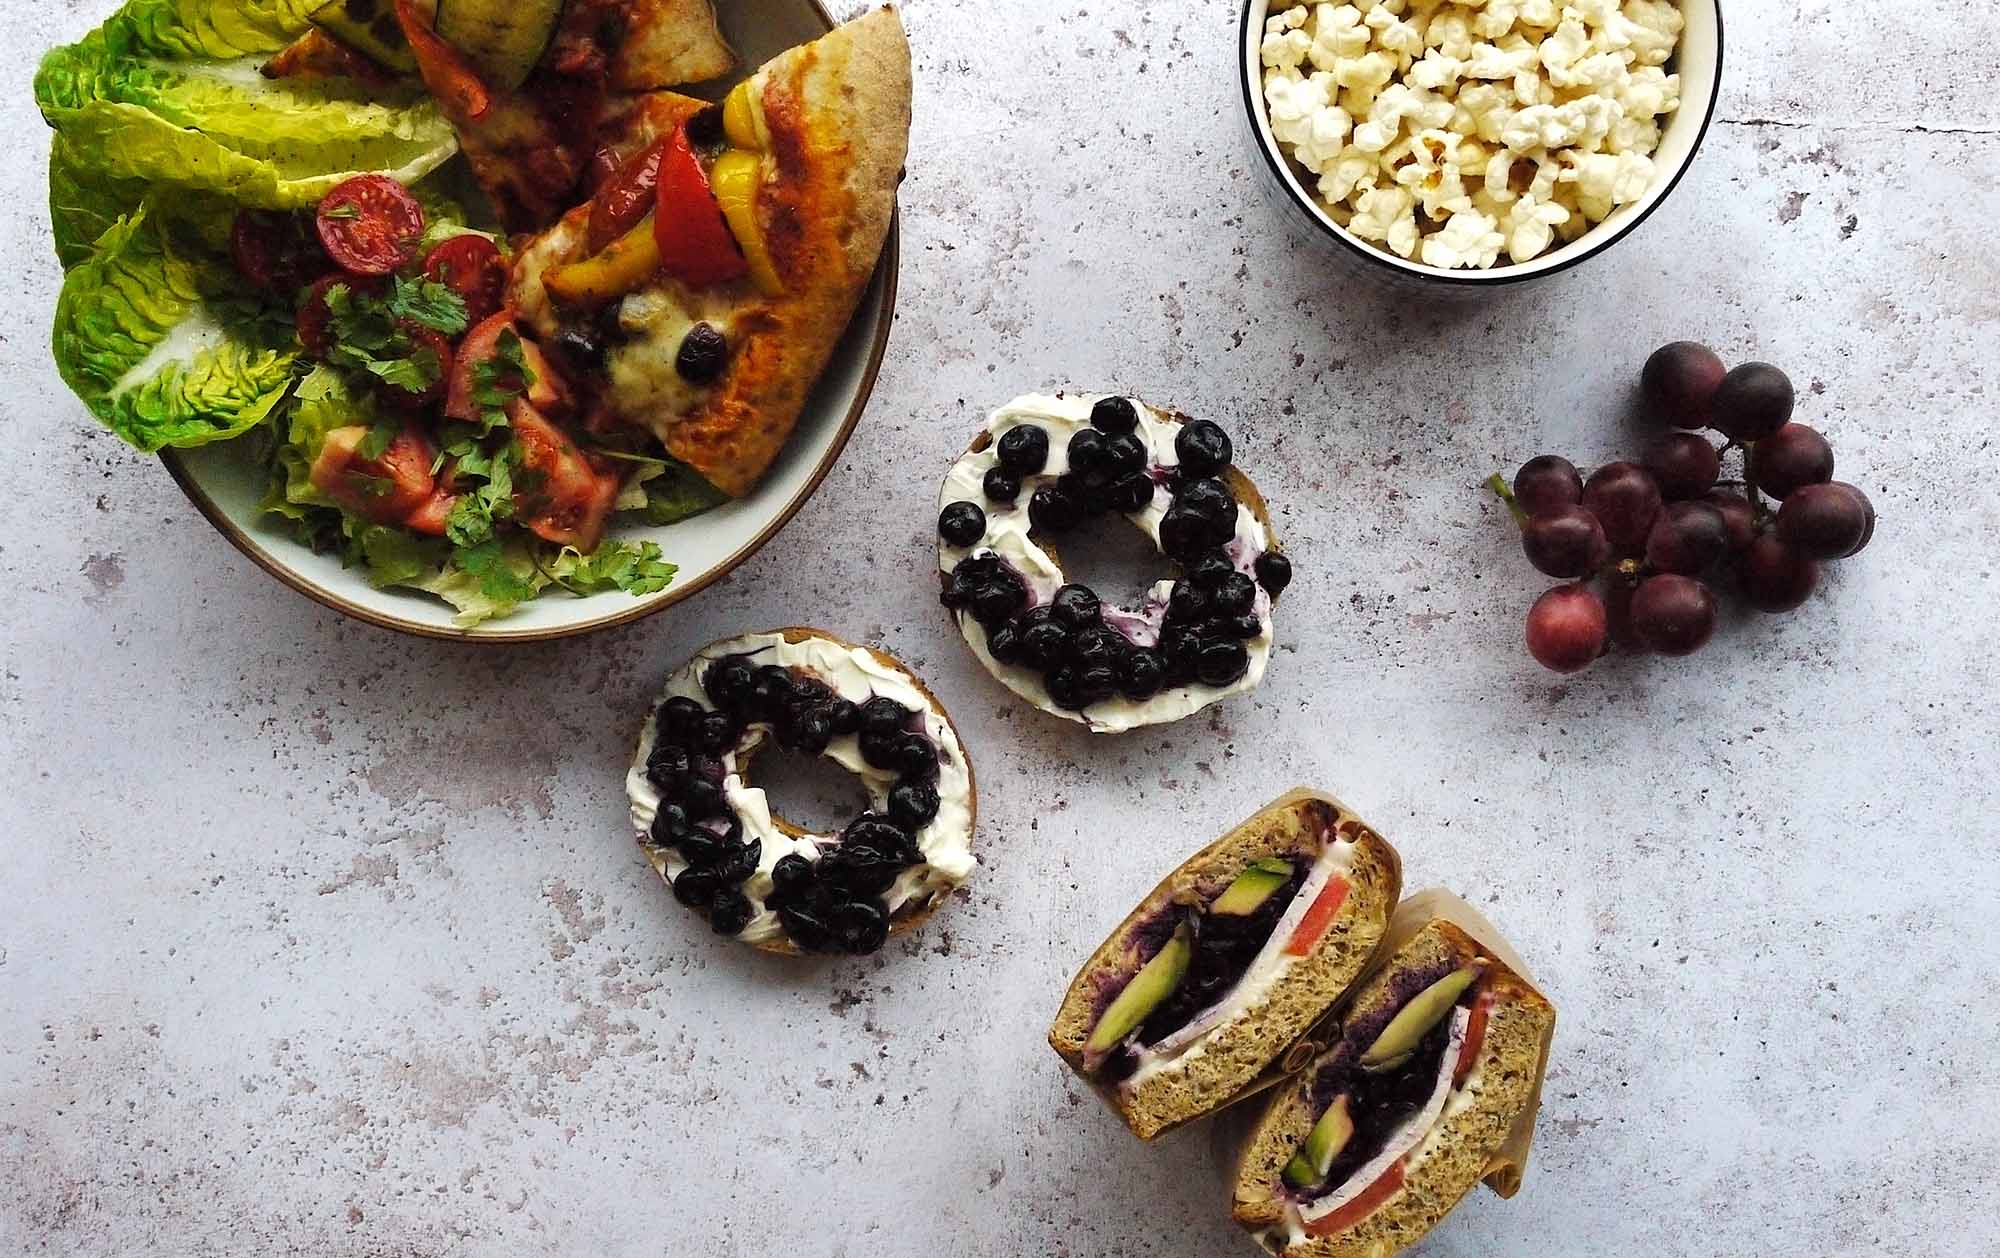 fruity bagels, pizza and salad, sandwiches, fruit and popcorn